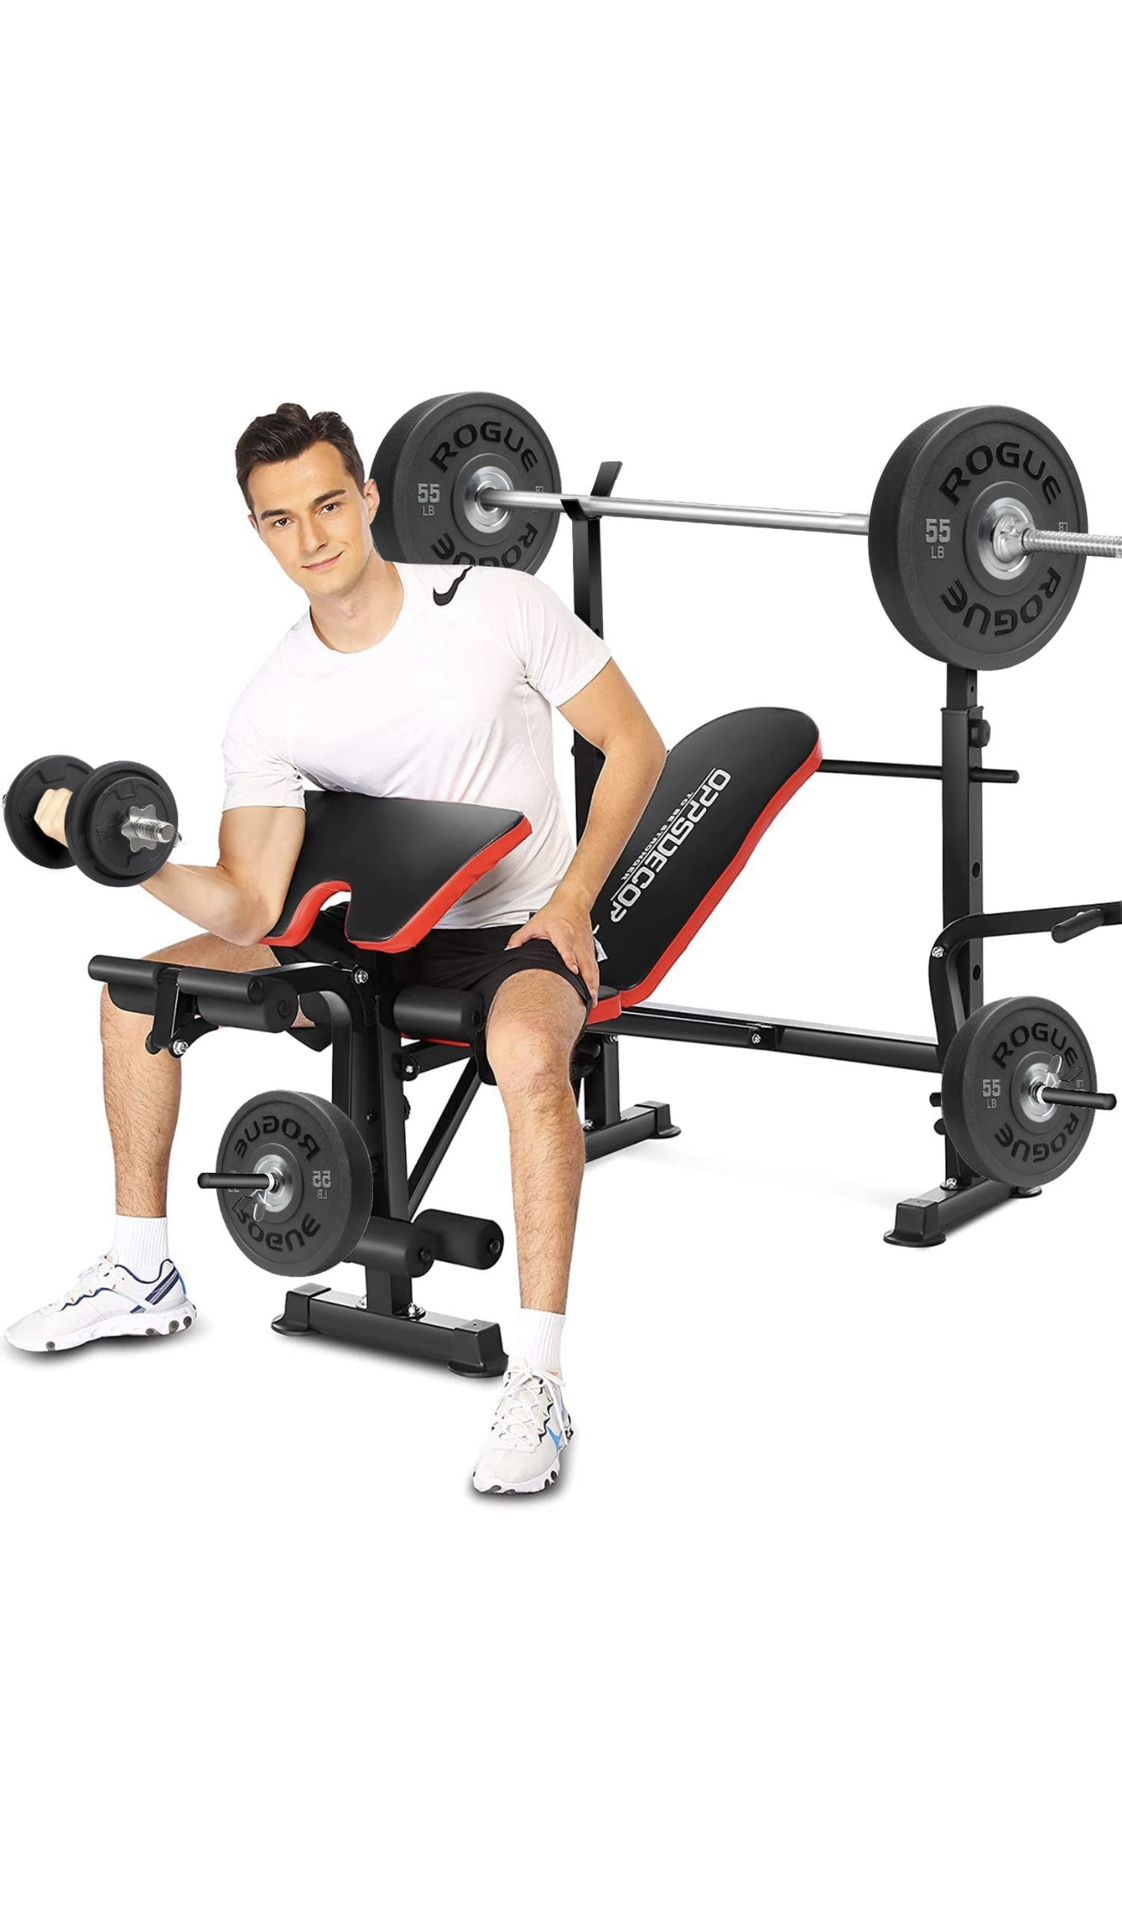 5-in-1 Adjustable Olympic Weight Bench (Fold Away)